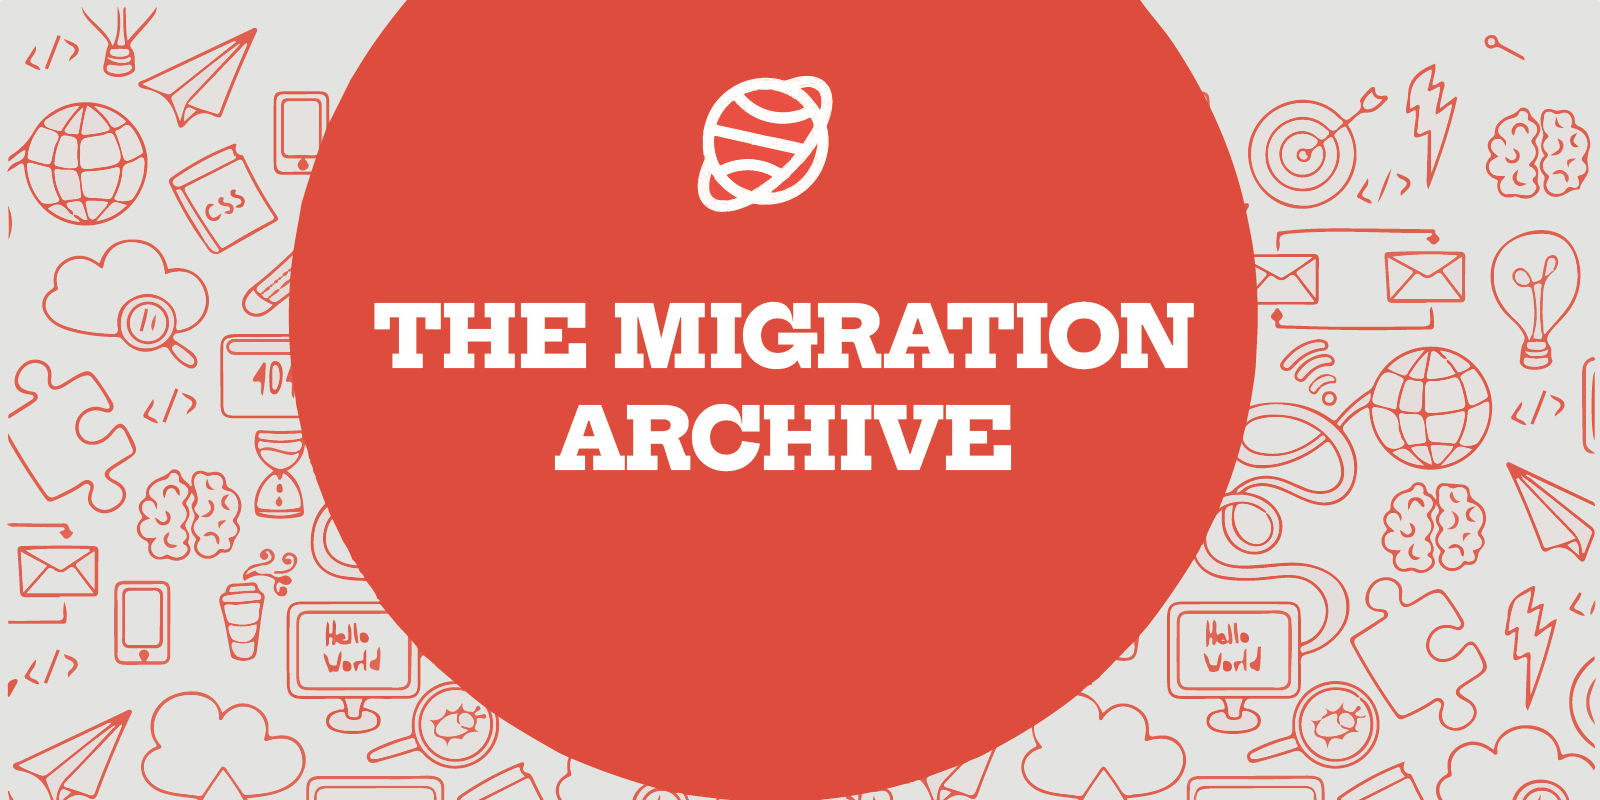 THE-MIGRATION-ARCHIVE